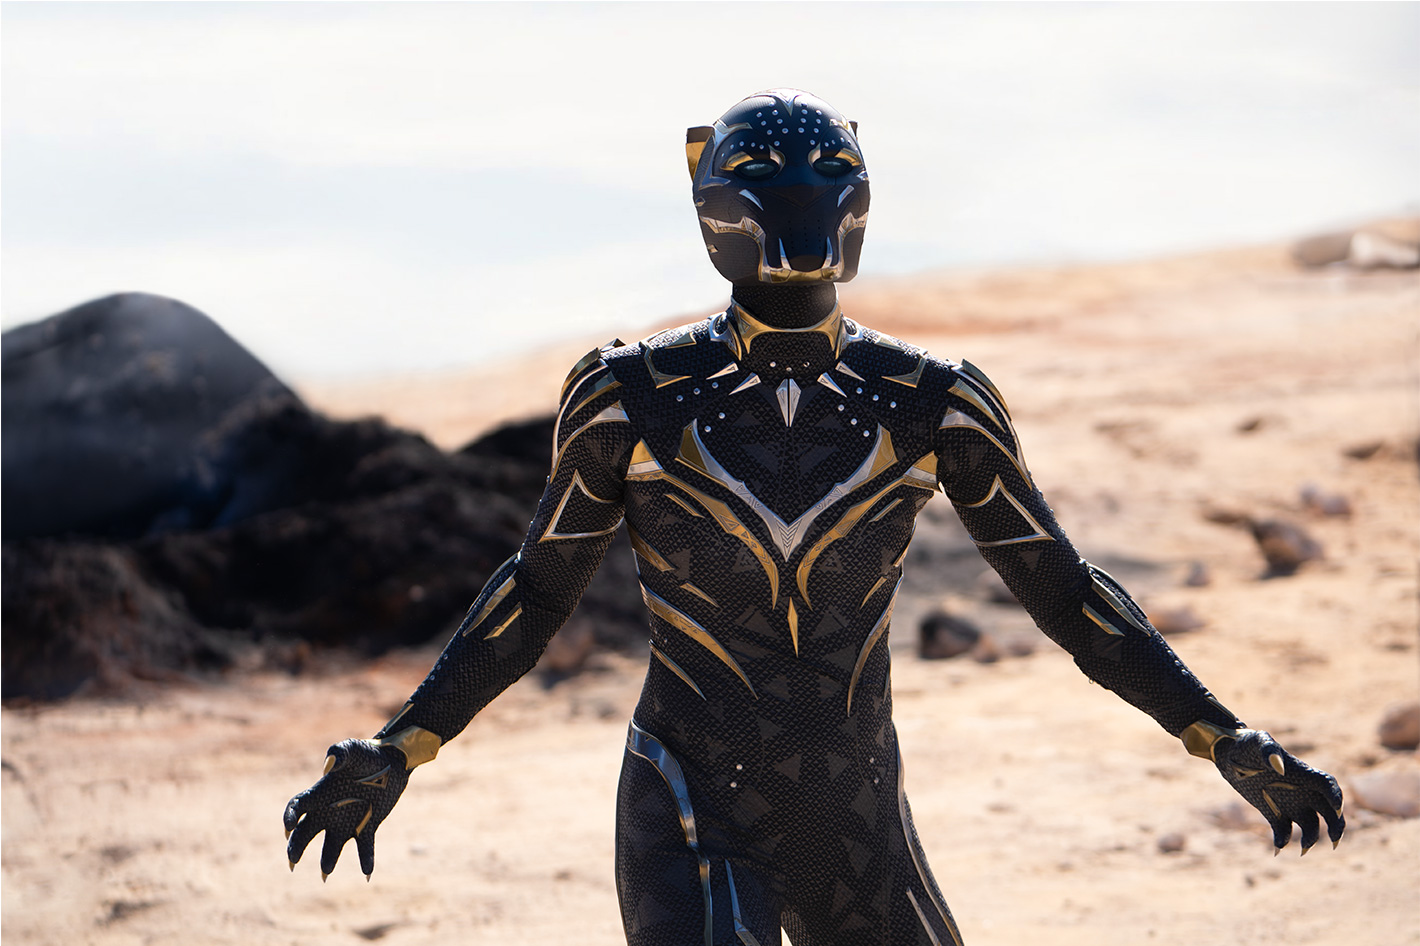 Black Panther: Wakanda Forever: Everything to Know